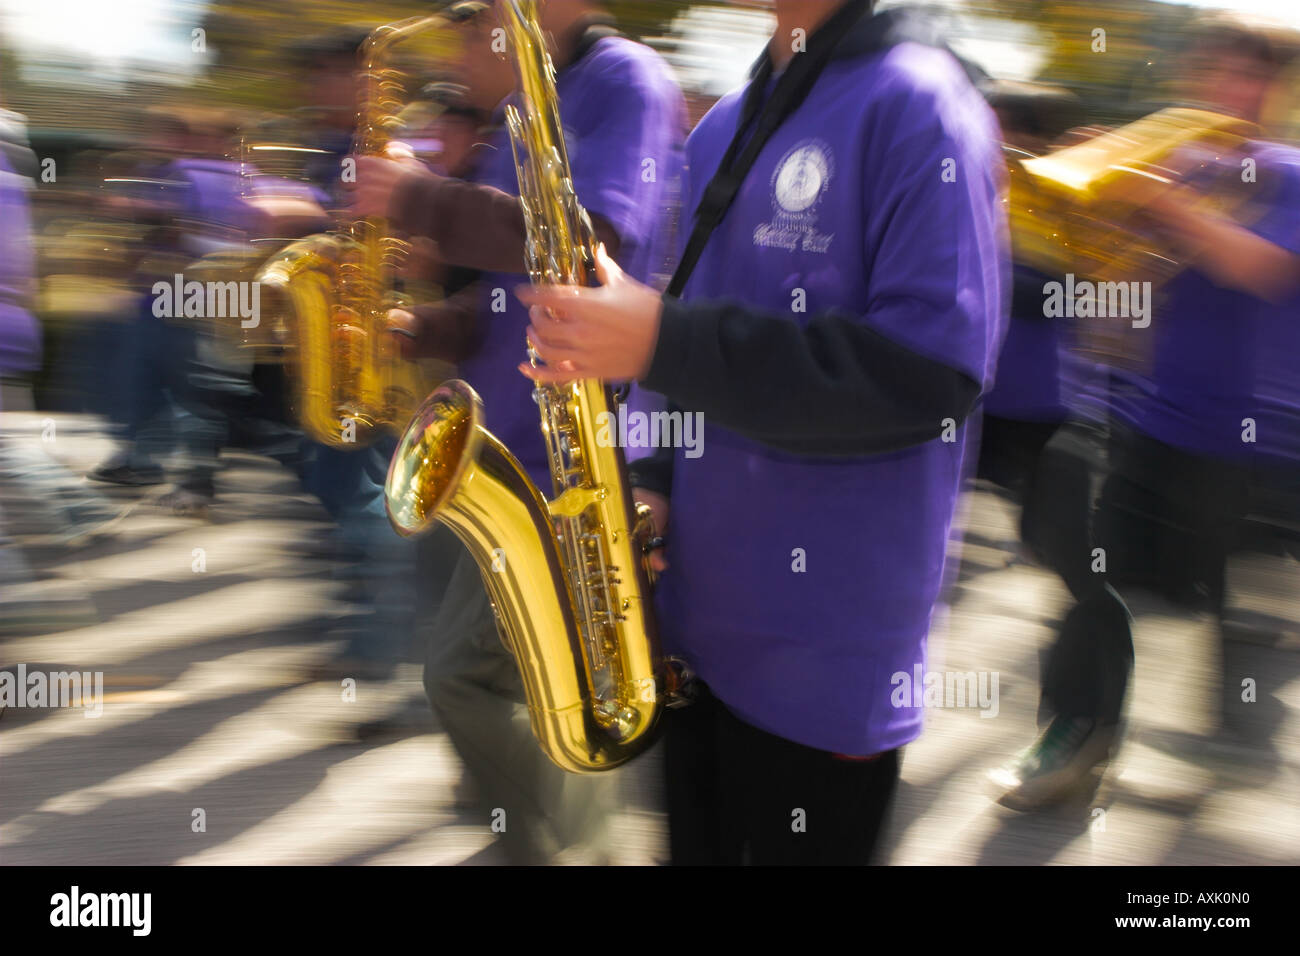 people students marching in parade blowing gold instrument trumpet in purple uniform event celebration music sound listen horn Stock Photo